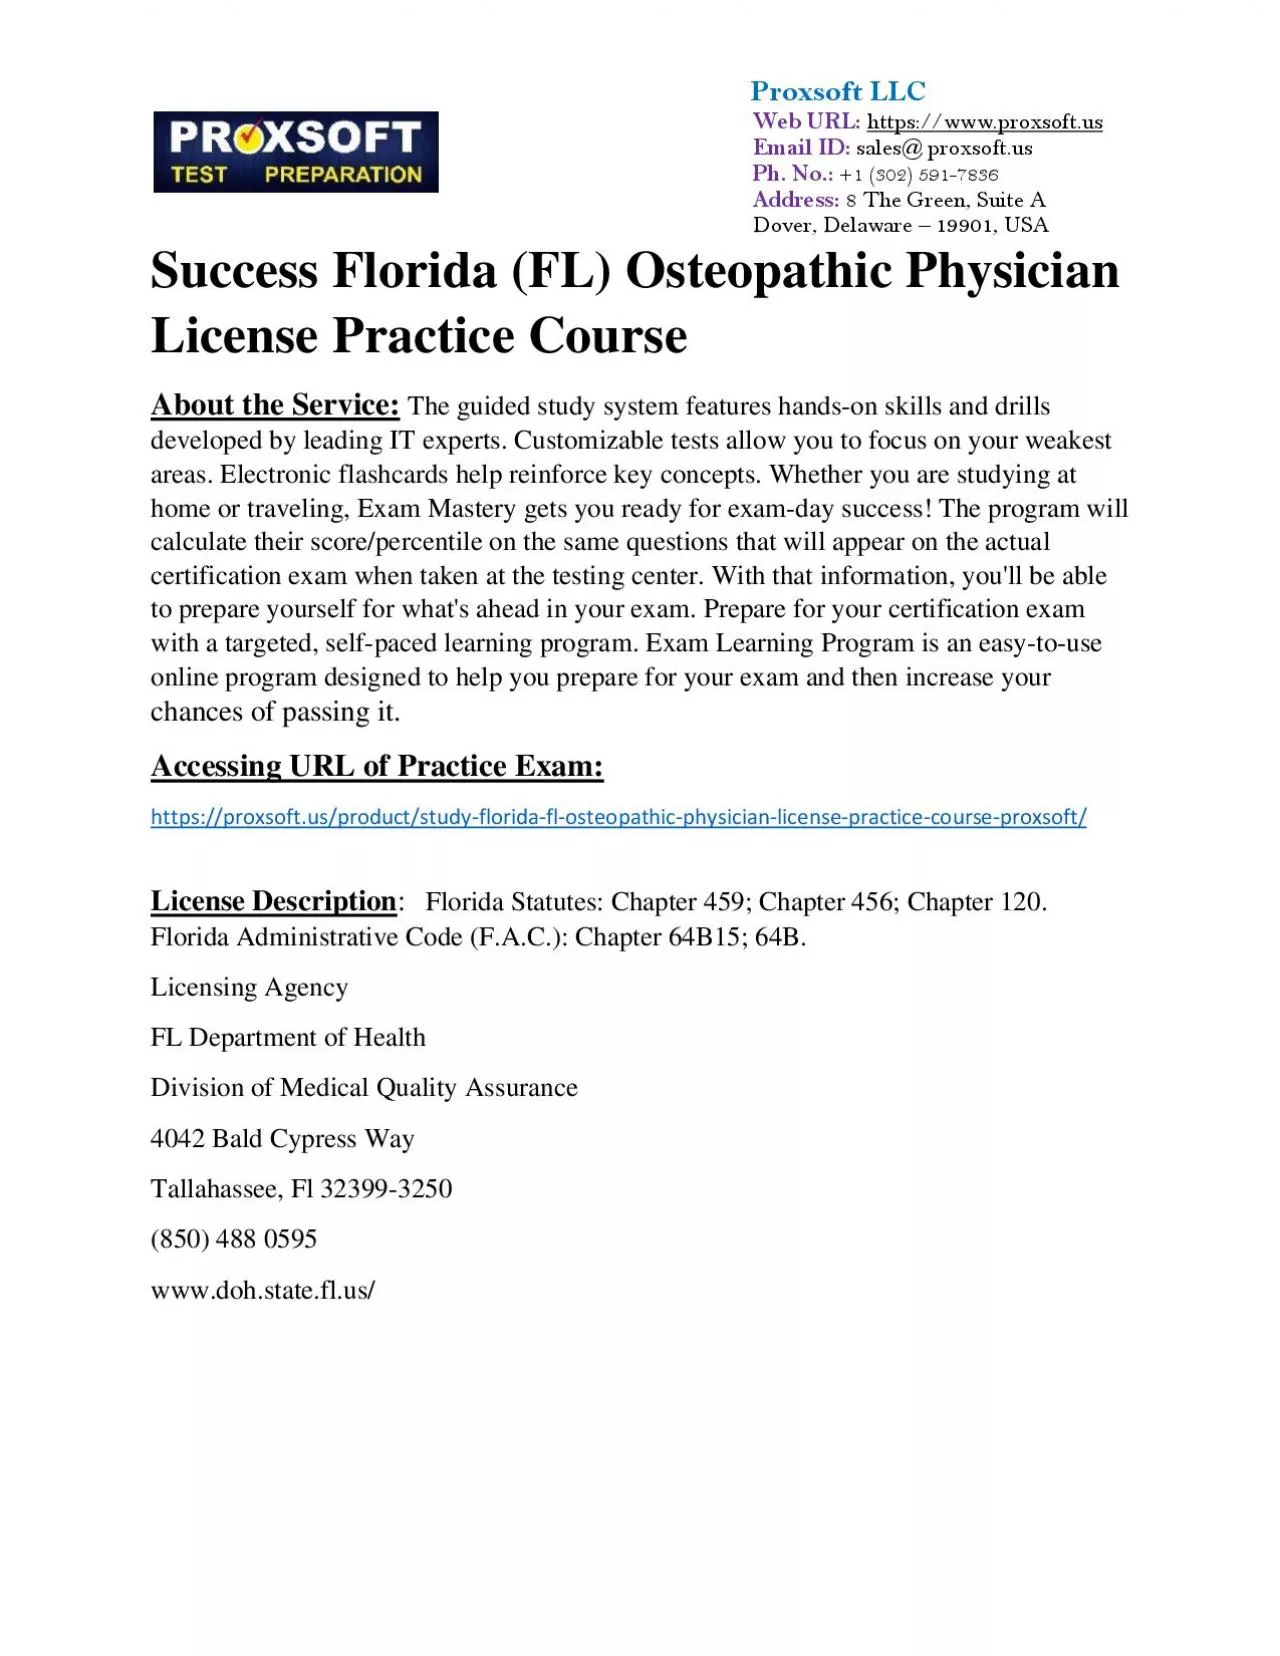 Success Florida (FL) Osteopathic Physician License Practice Course